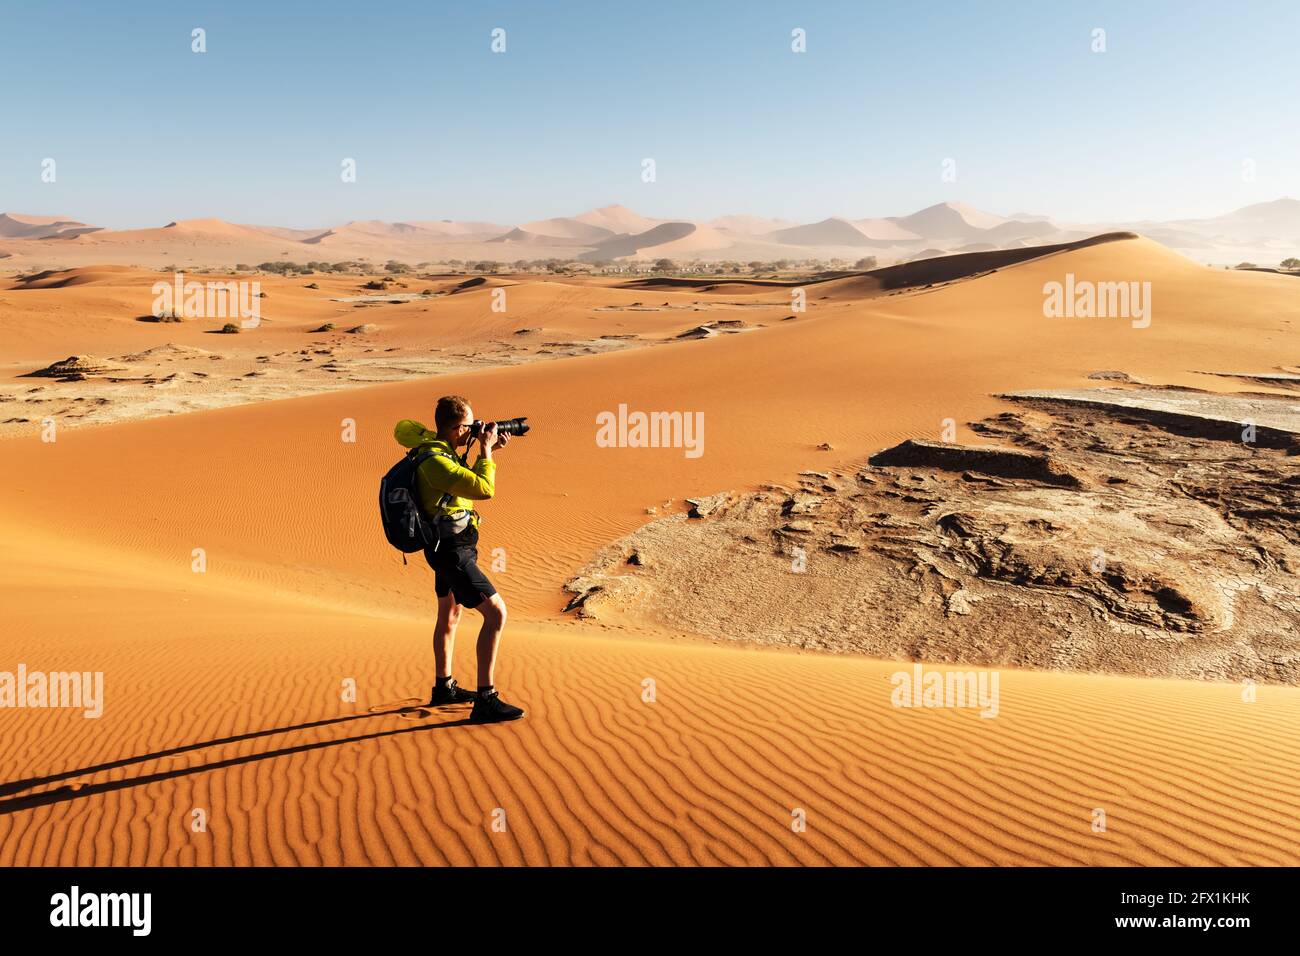 Photographer taking photo in Deadvlei, Namib-Naukluft National Park, Namibia, Africa. Dried ground with sand in Namib desert during sunset. Landscape photography Stock Photo